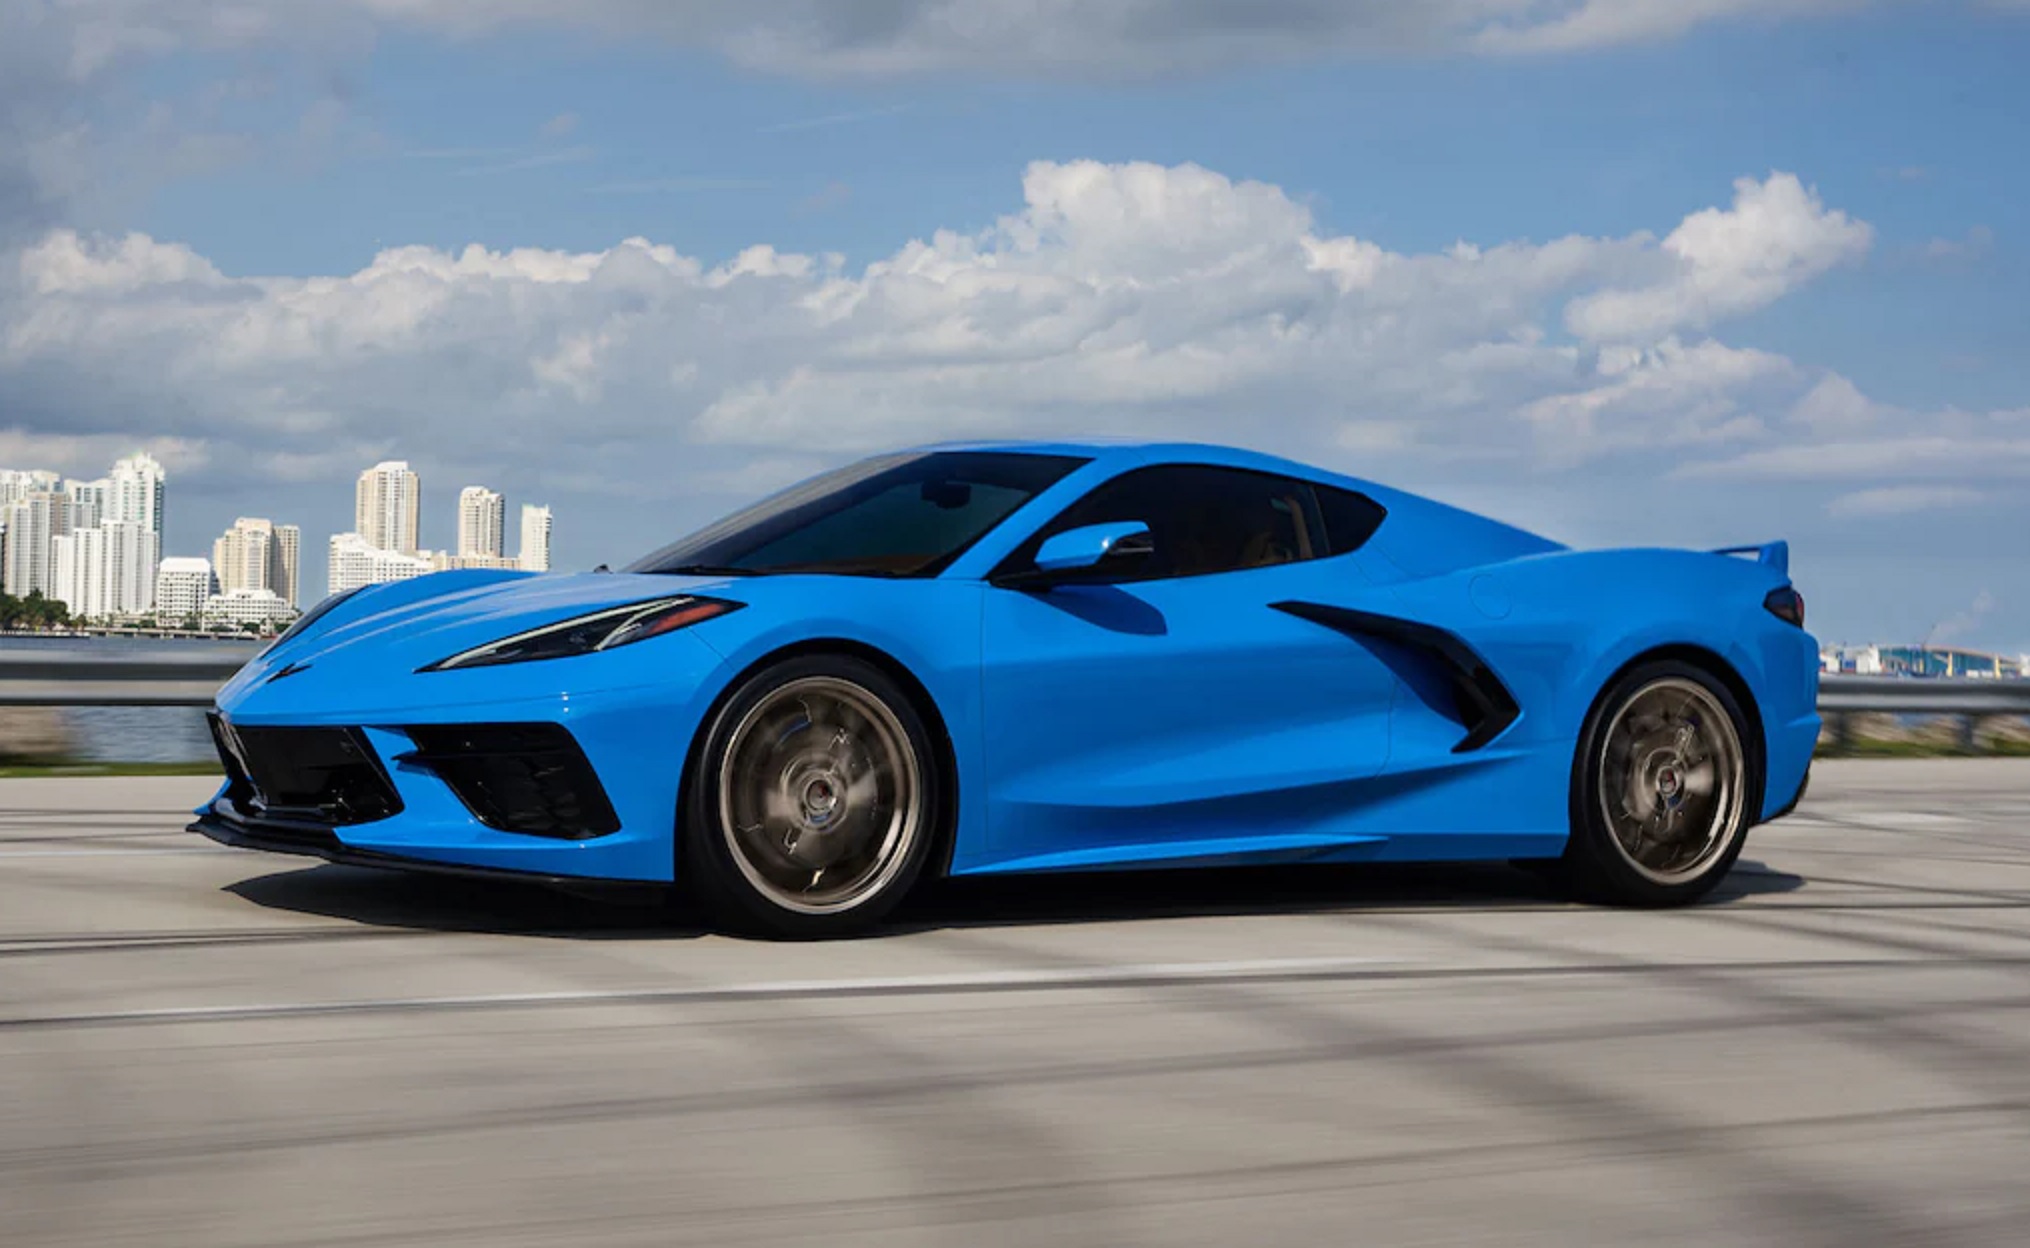 A blue 2022 Chevrolet C8 Corvette 3LT Coupe driving down a city road by a body of water